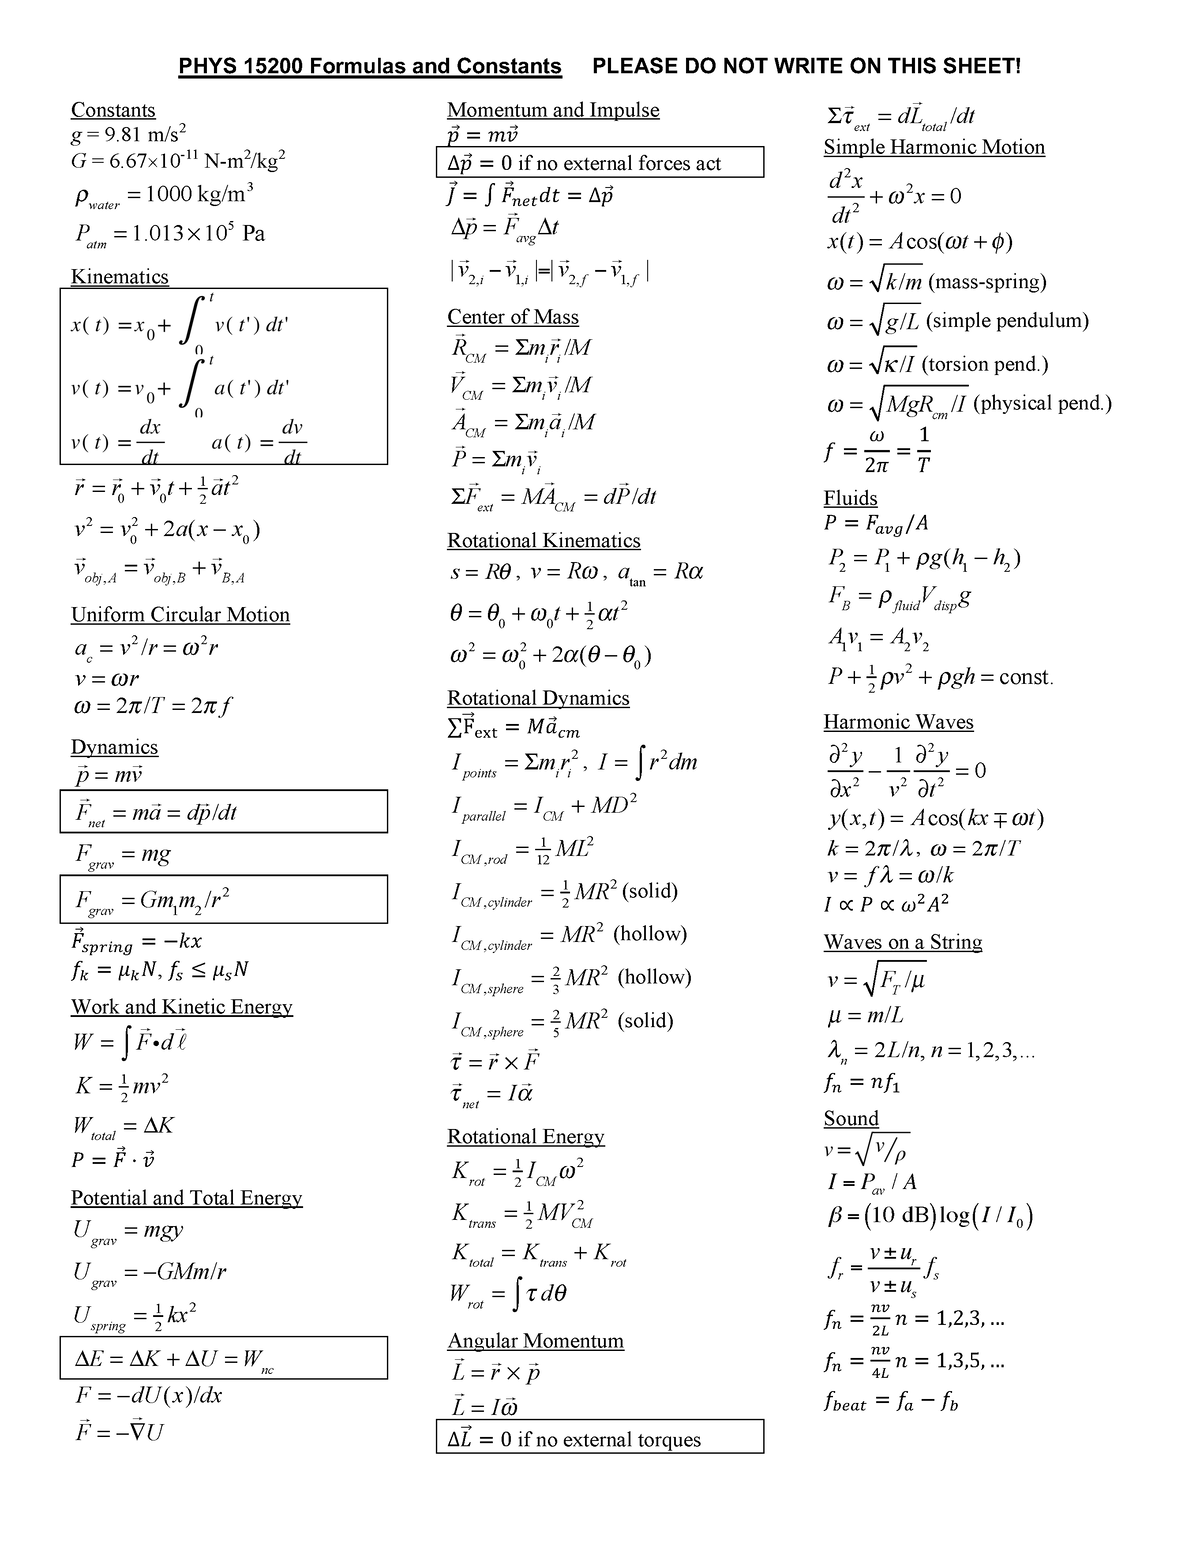 Physics formula - Ch11 and 13 equations not listed - PHYS 15200 ...